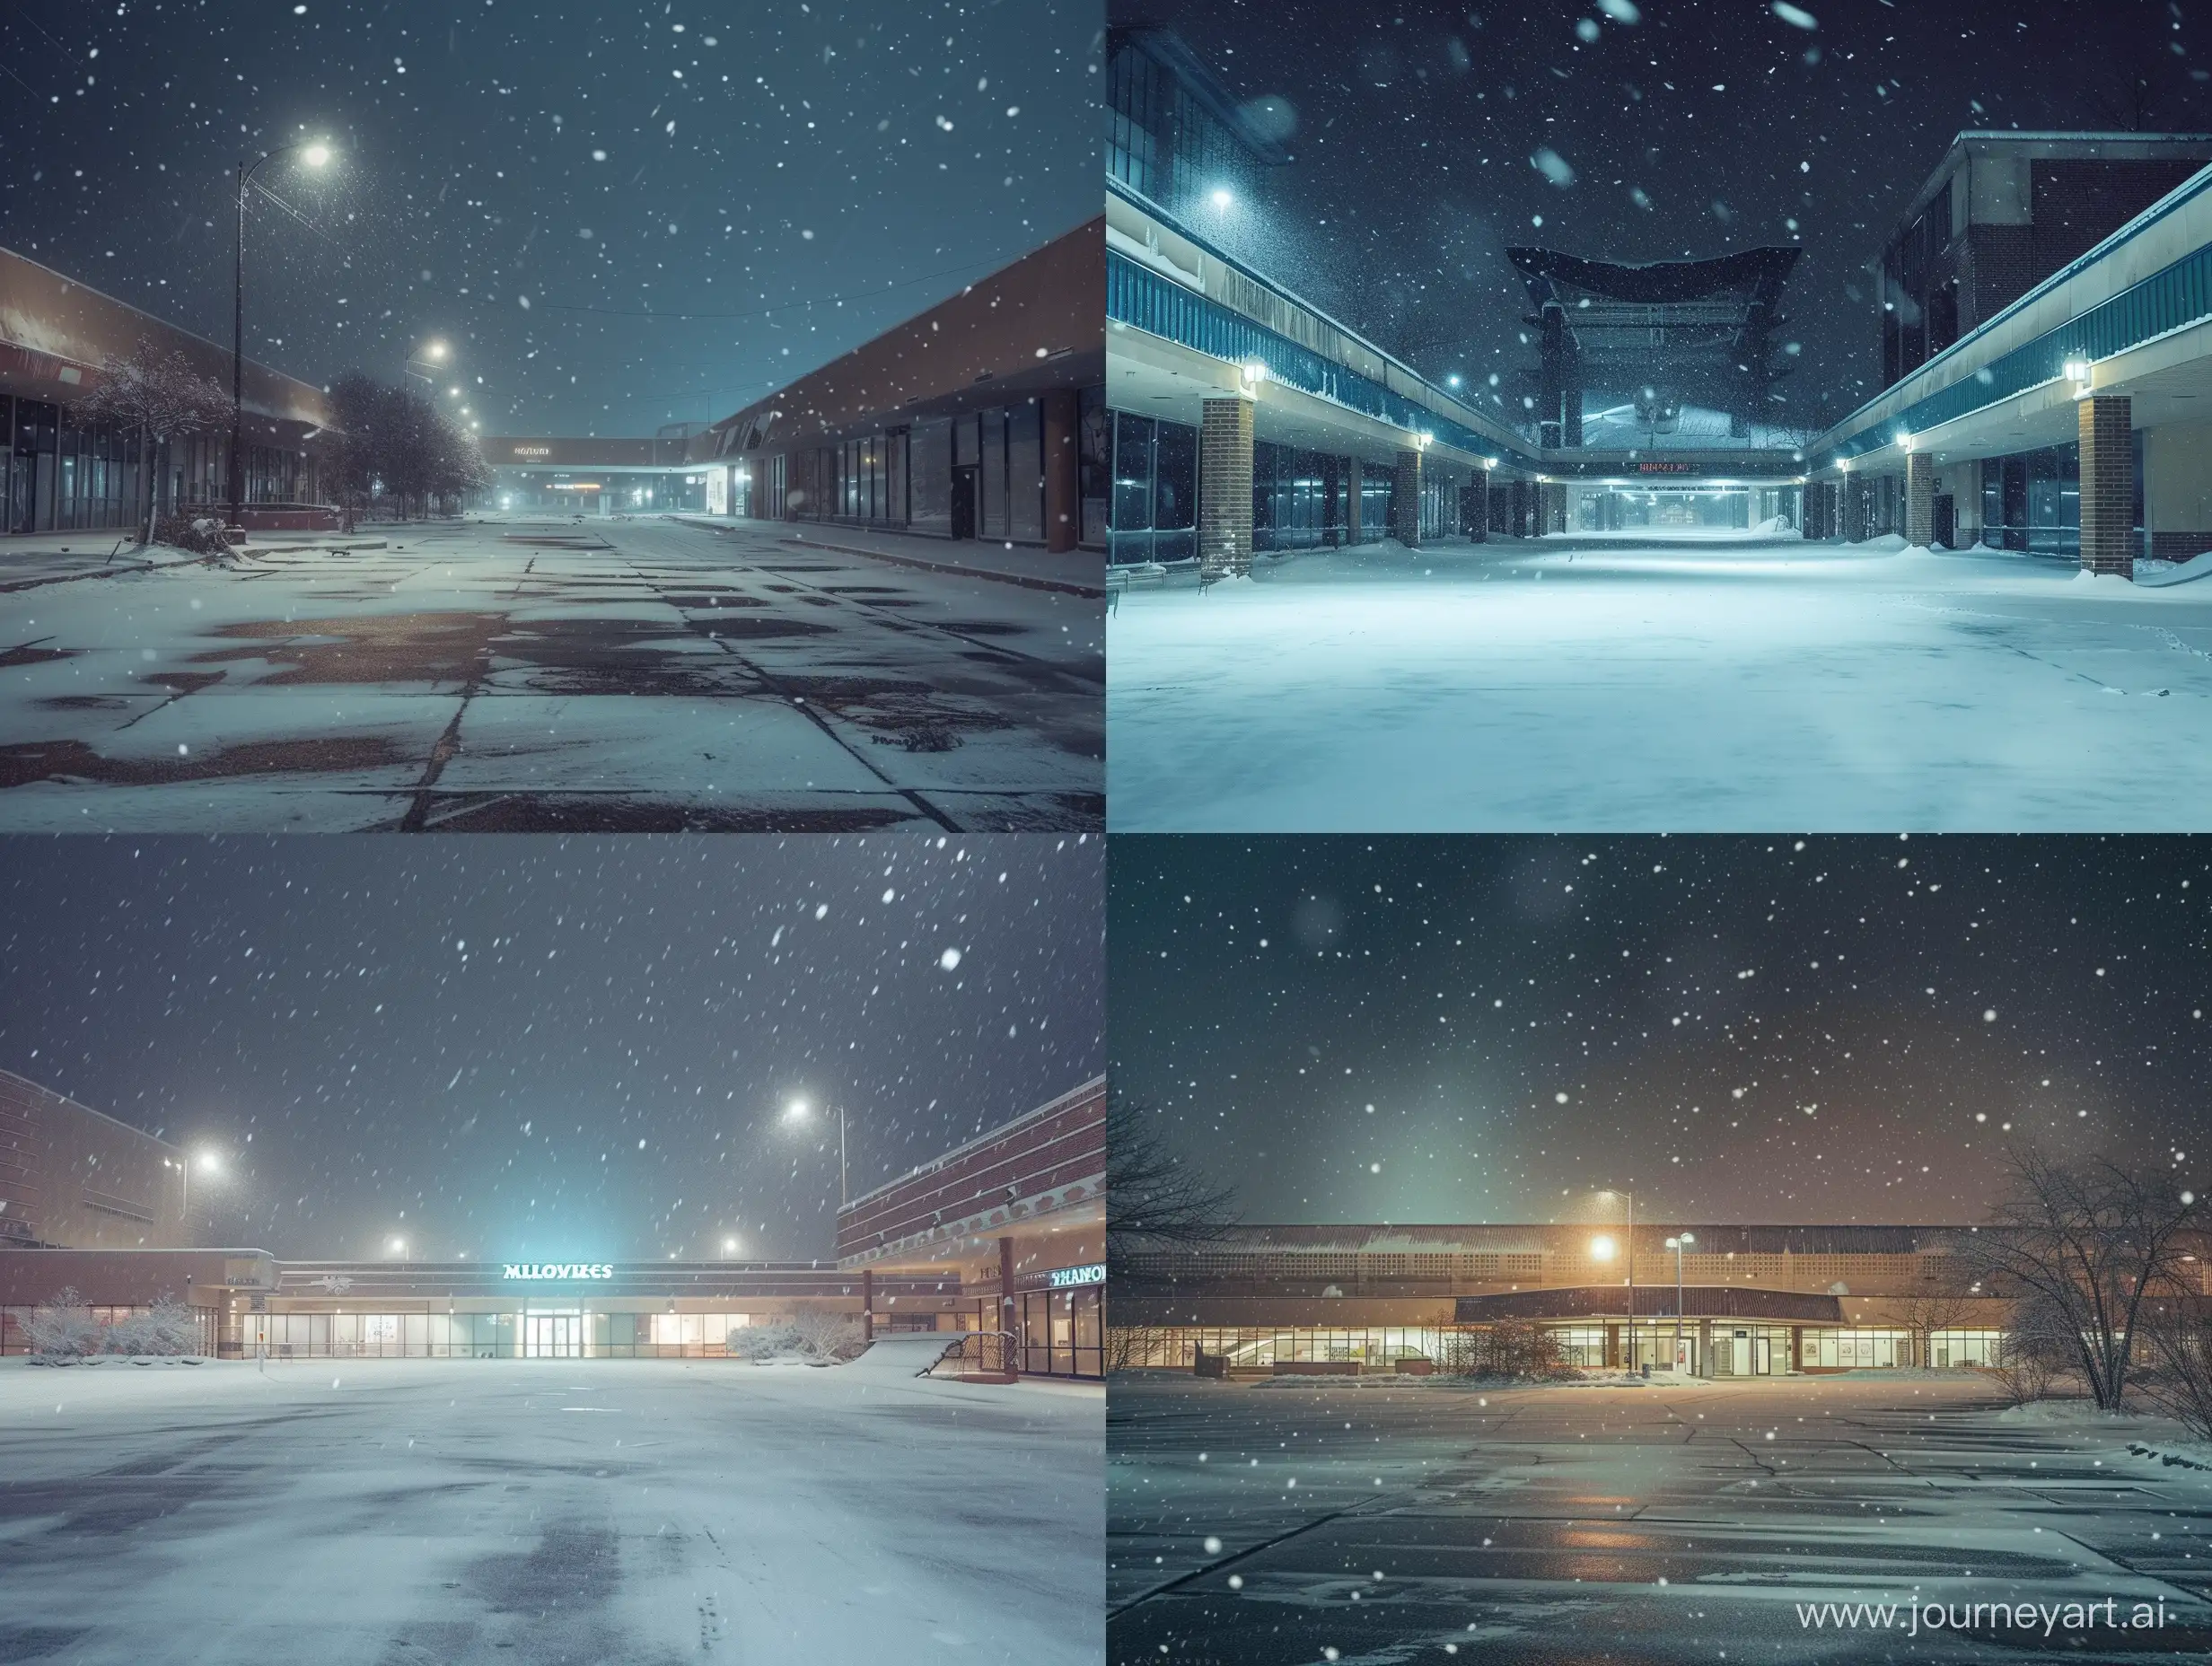 Eerie-Night-Scene-Abandoned-Mall-in-Snowstorm